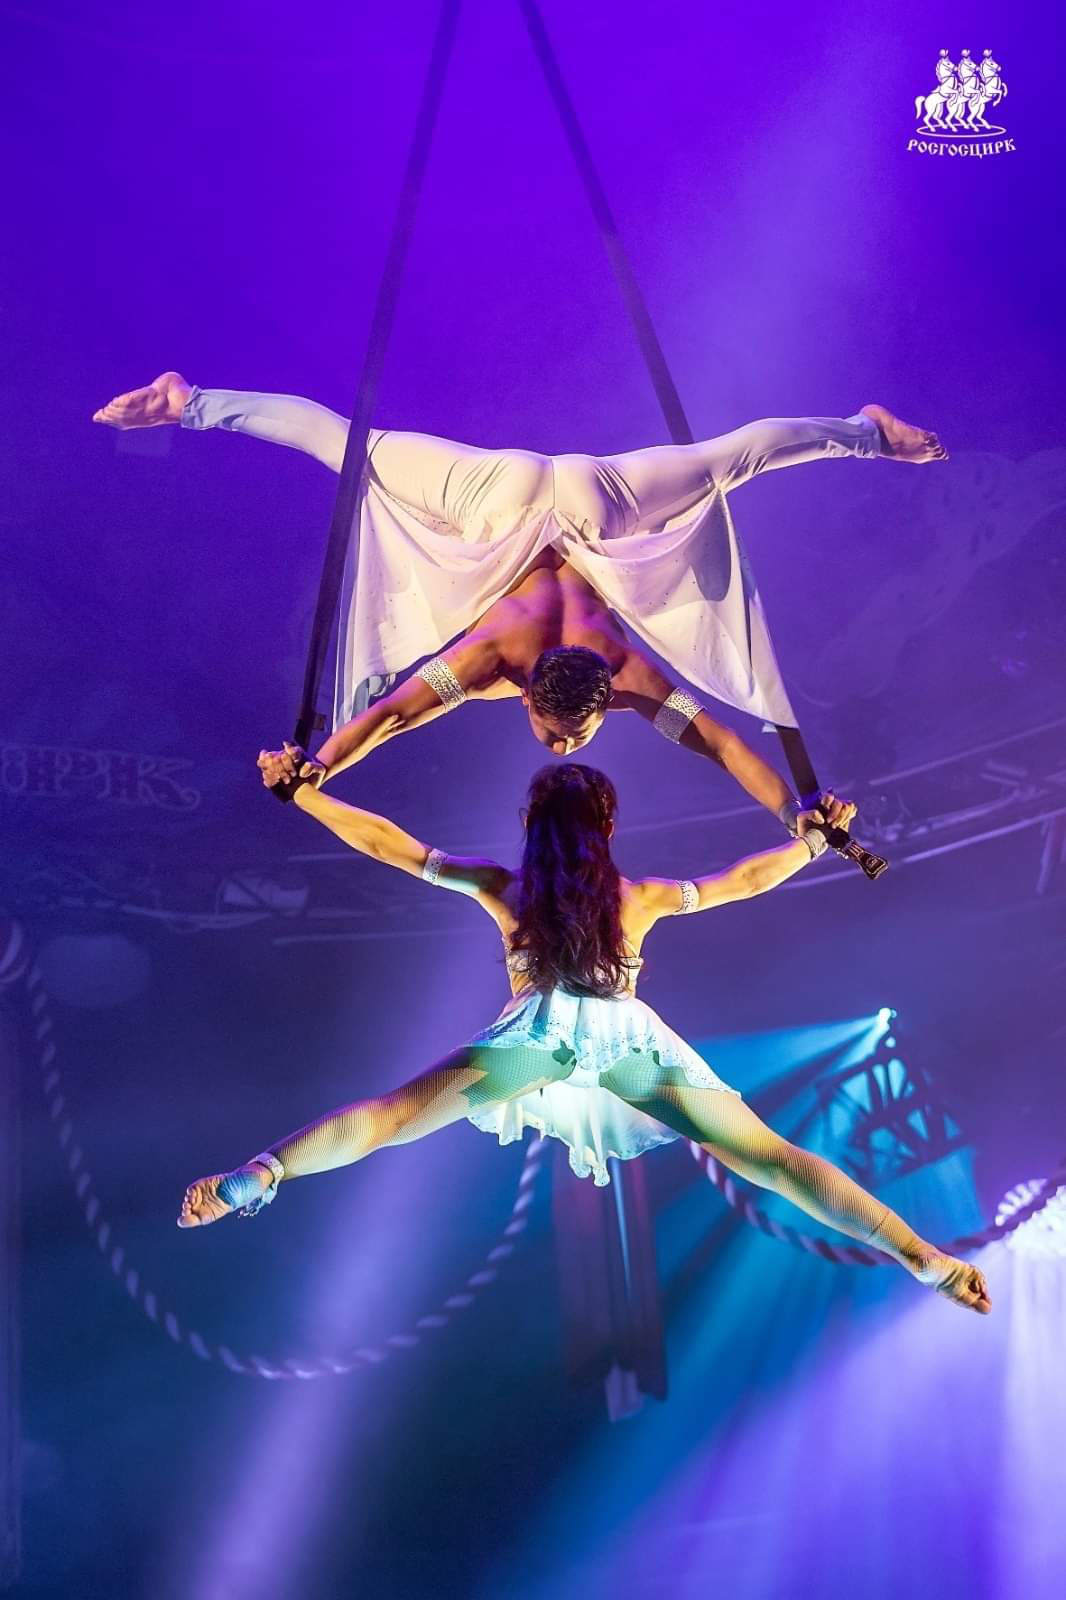 Vietnamese artists Hien Phuoc (above) and Thanh Hoa perform the circus act titled ‘Moment of Love’ at the second International Circus Festival ‘Without Borders’ in St. Petersburg, Russia, September 2023. Photo: Supplied